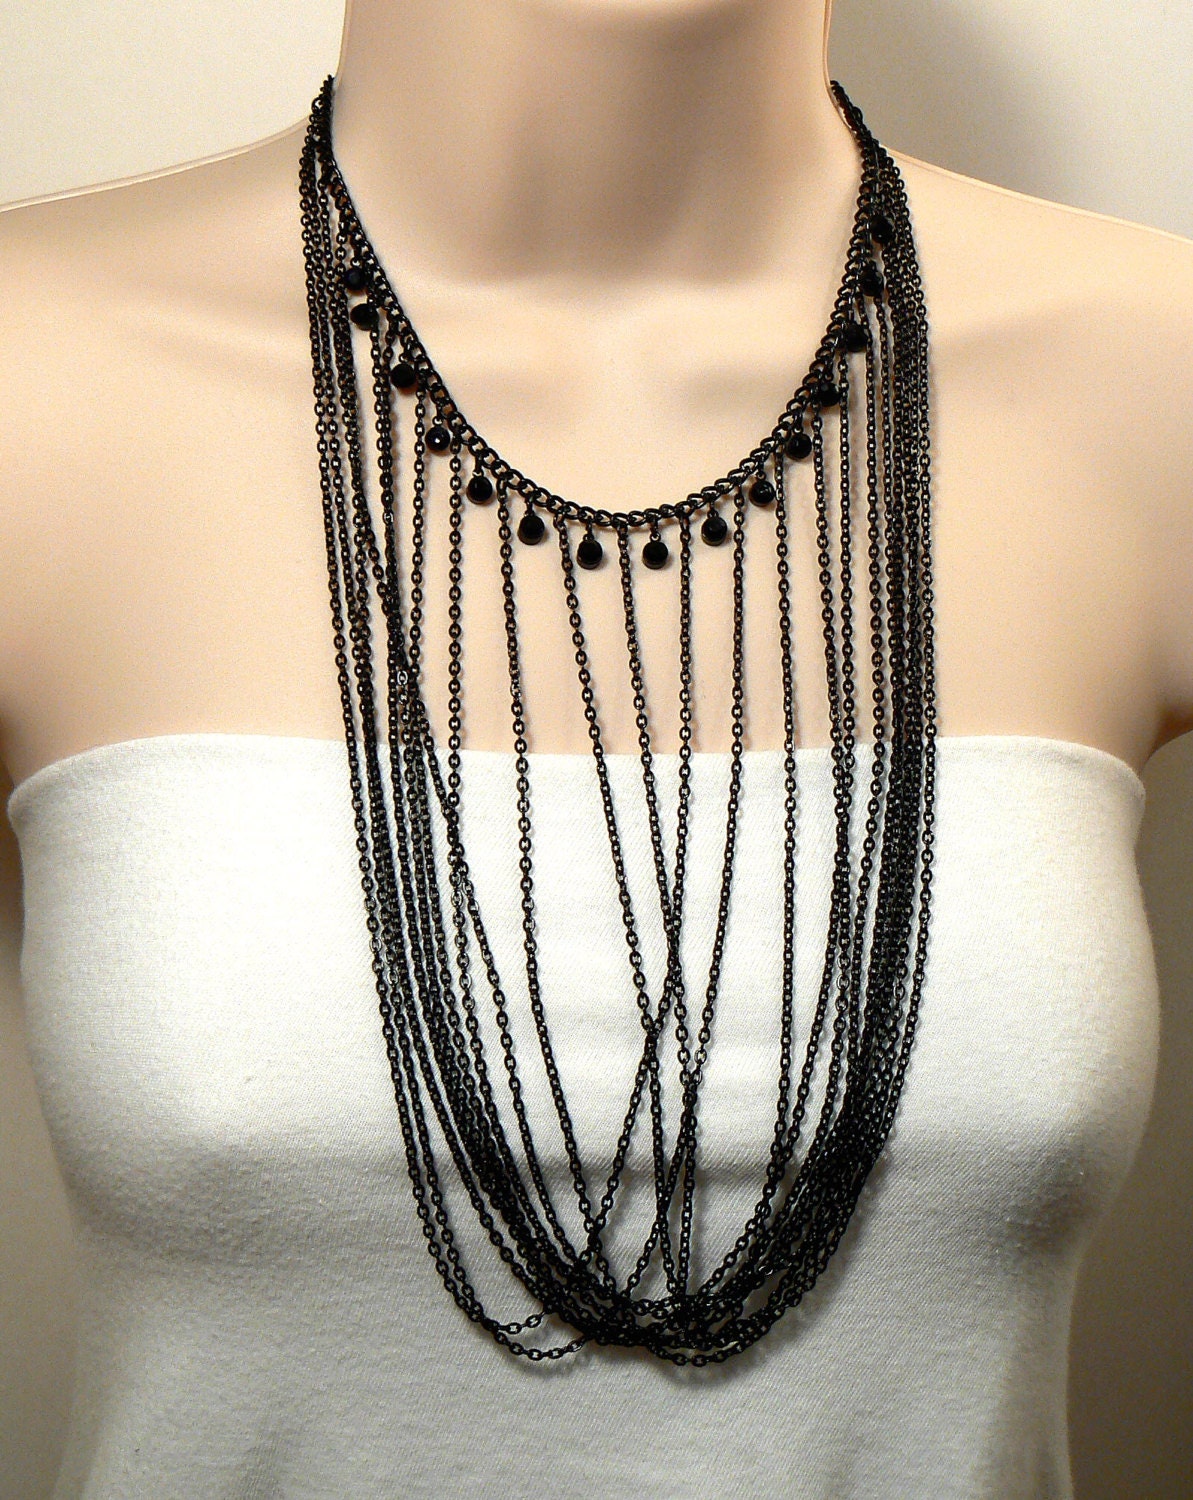 Long Black Chain Necklace Layered Black Chain Necklace